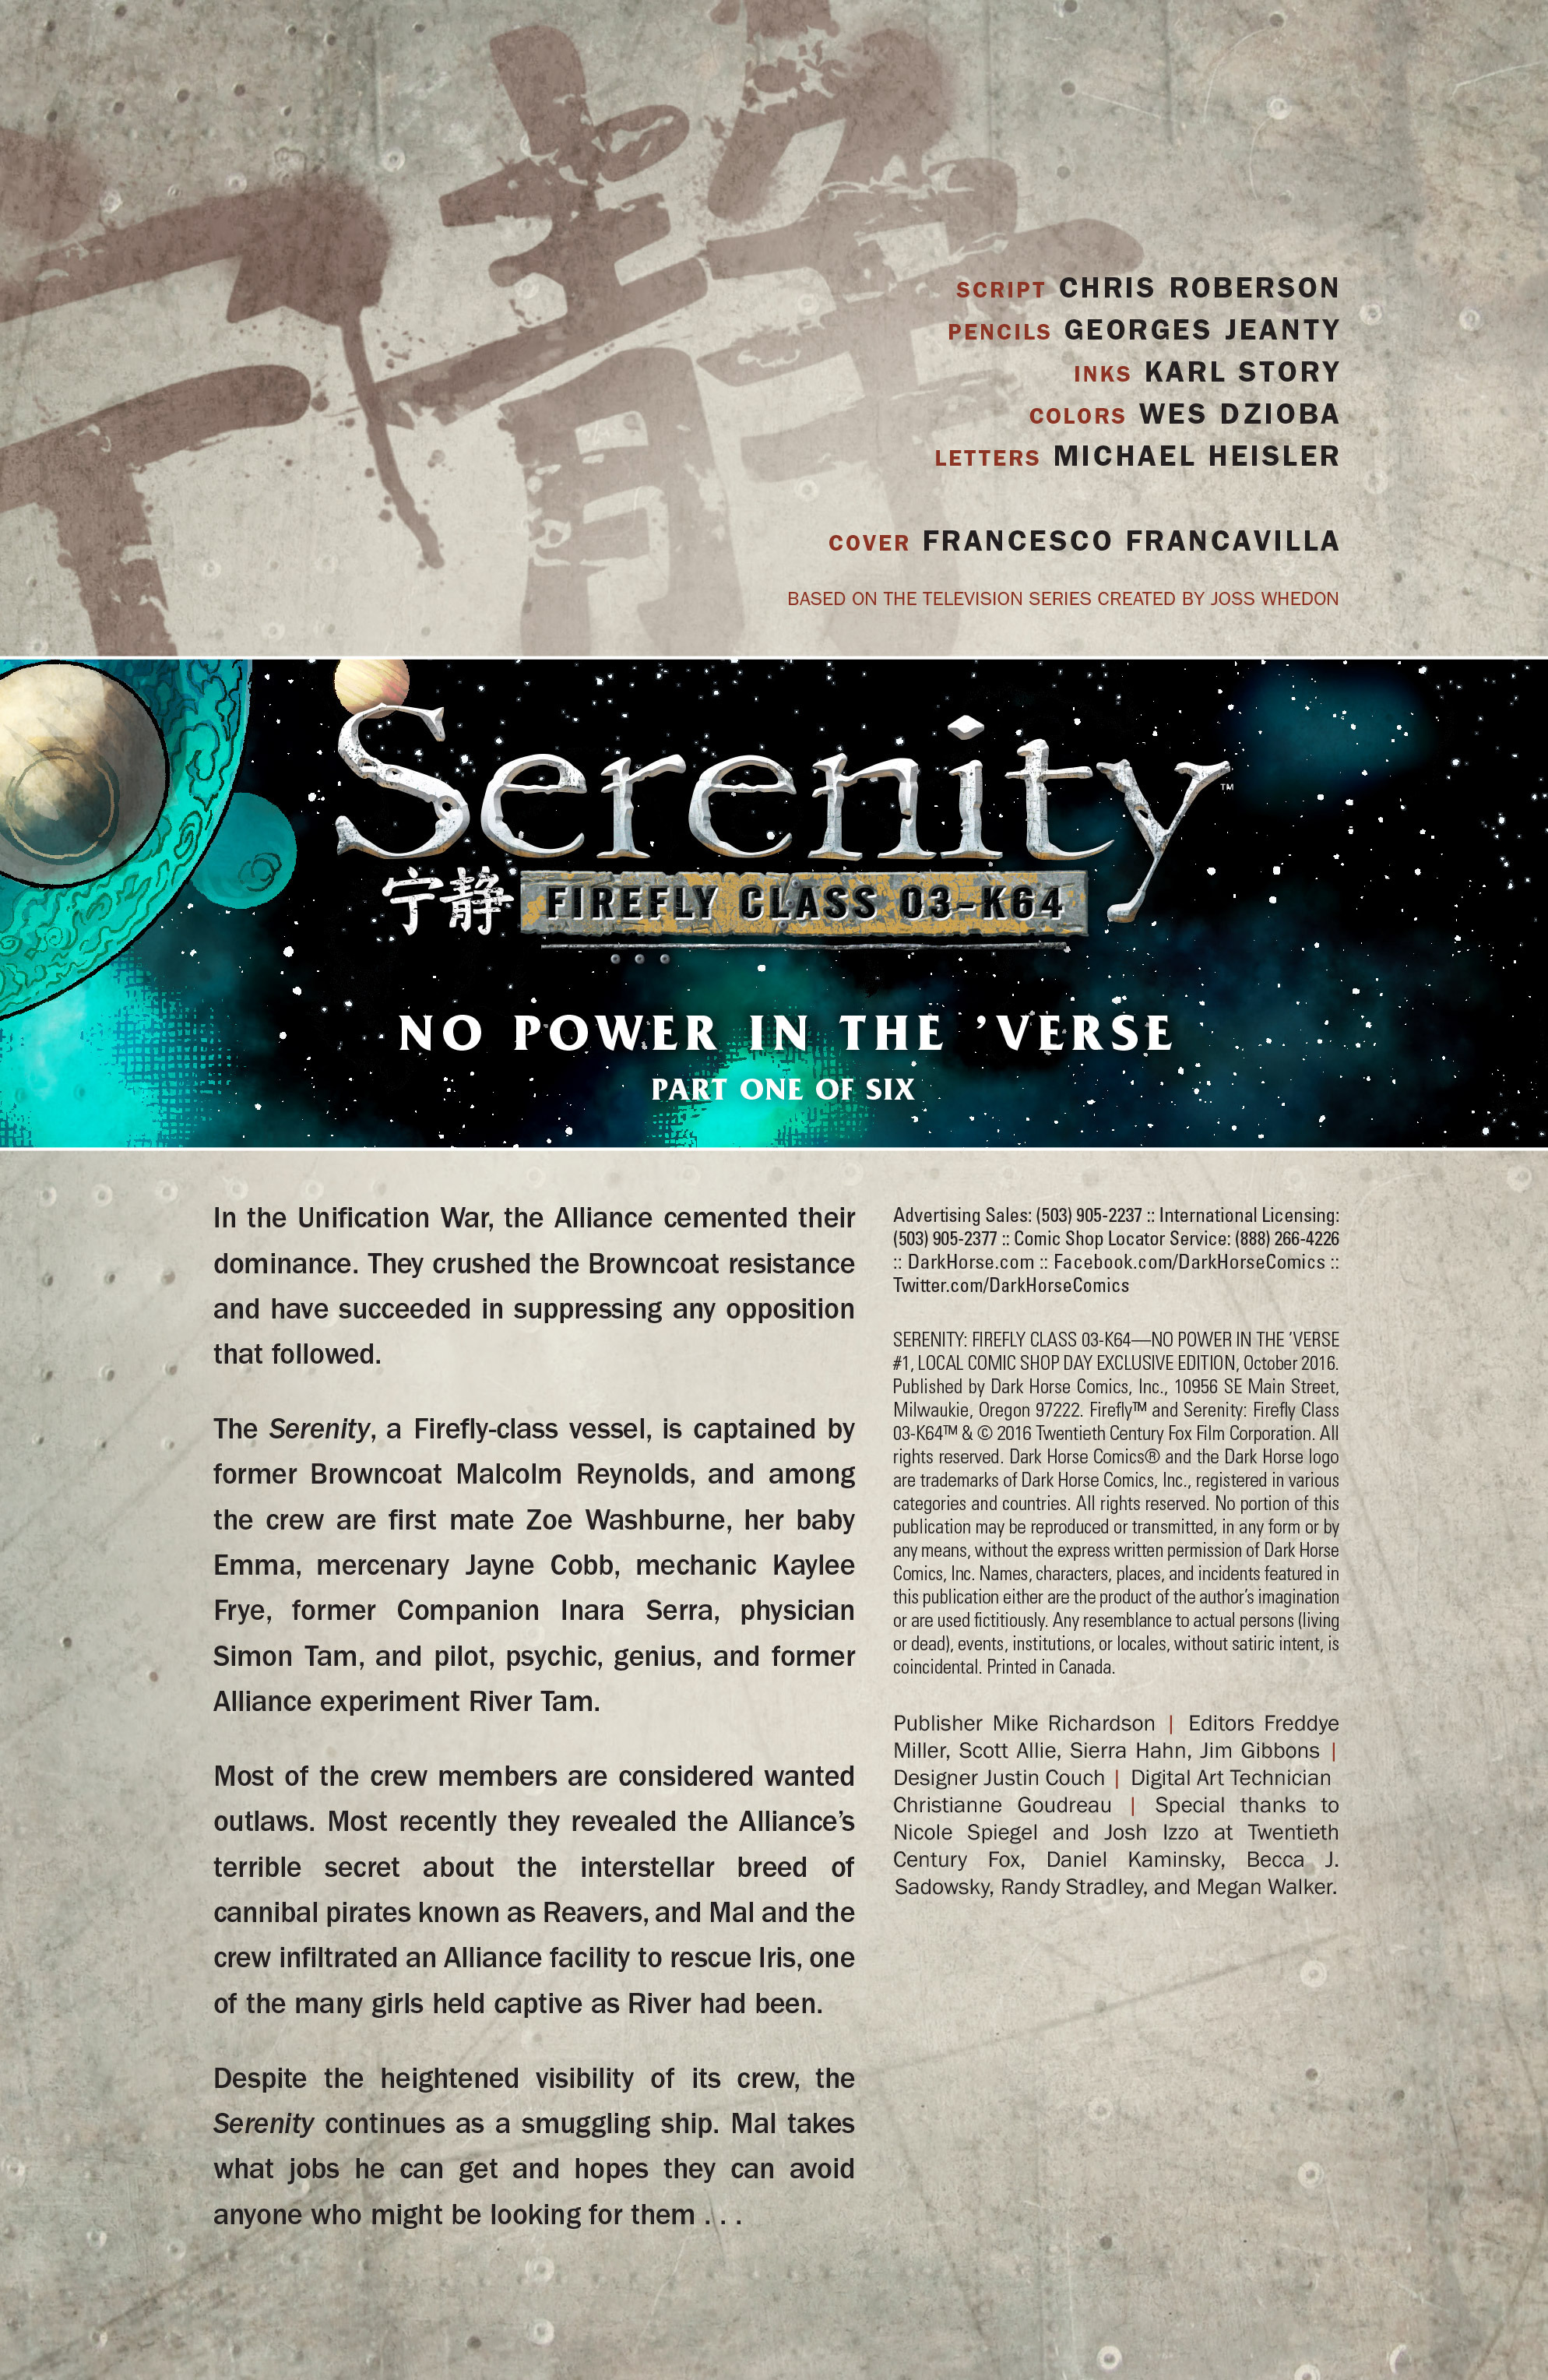 Read online Serenity: Firefly Class 03-K64 – No Power in the 'Verse comic -  Issue #1 - 11